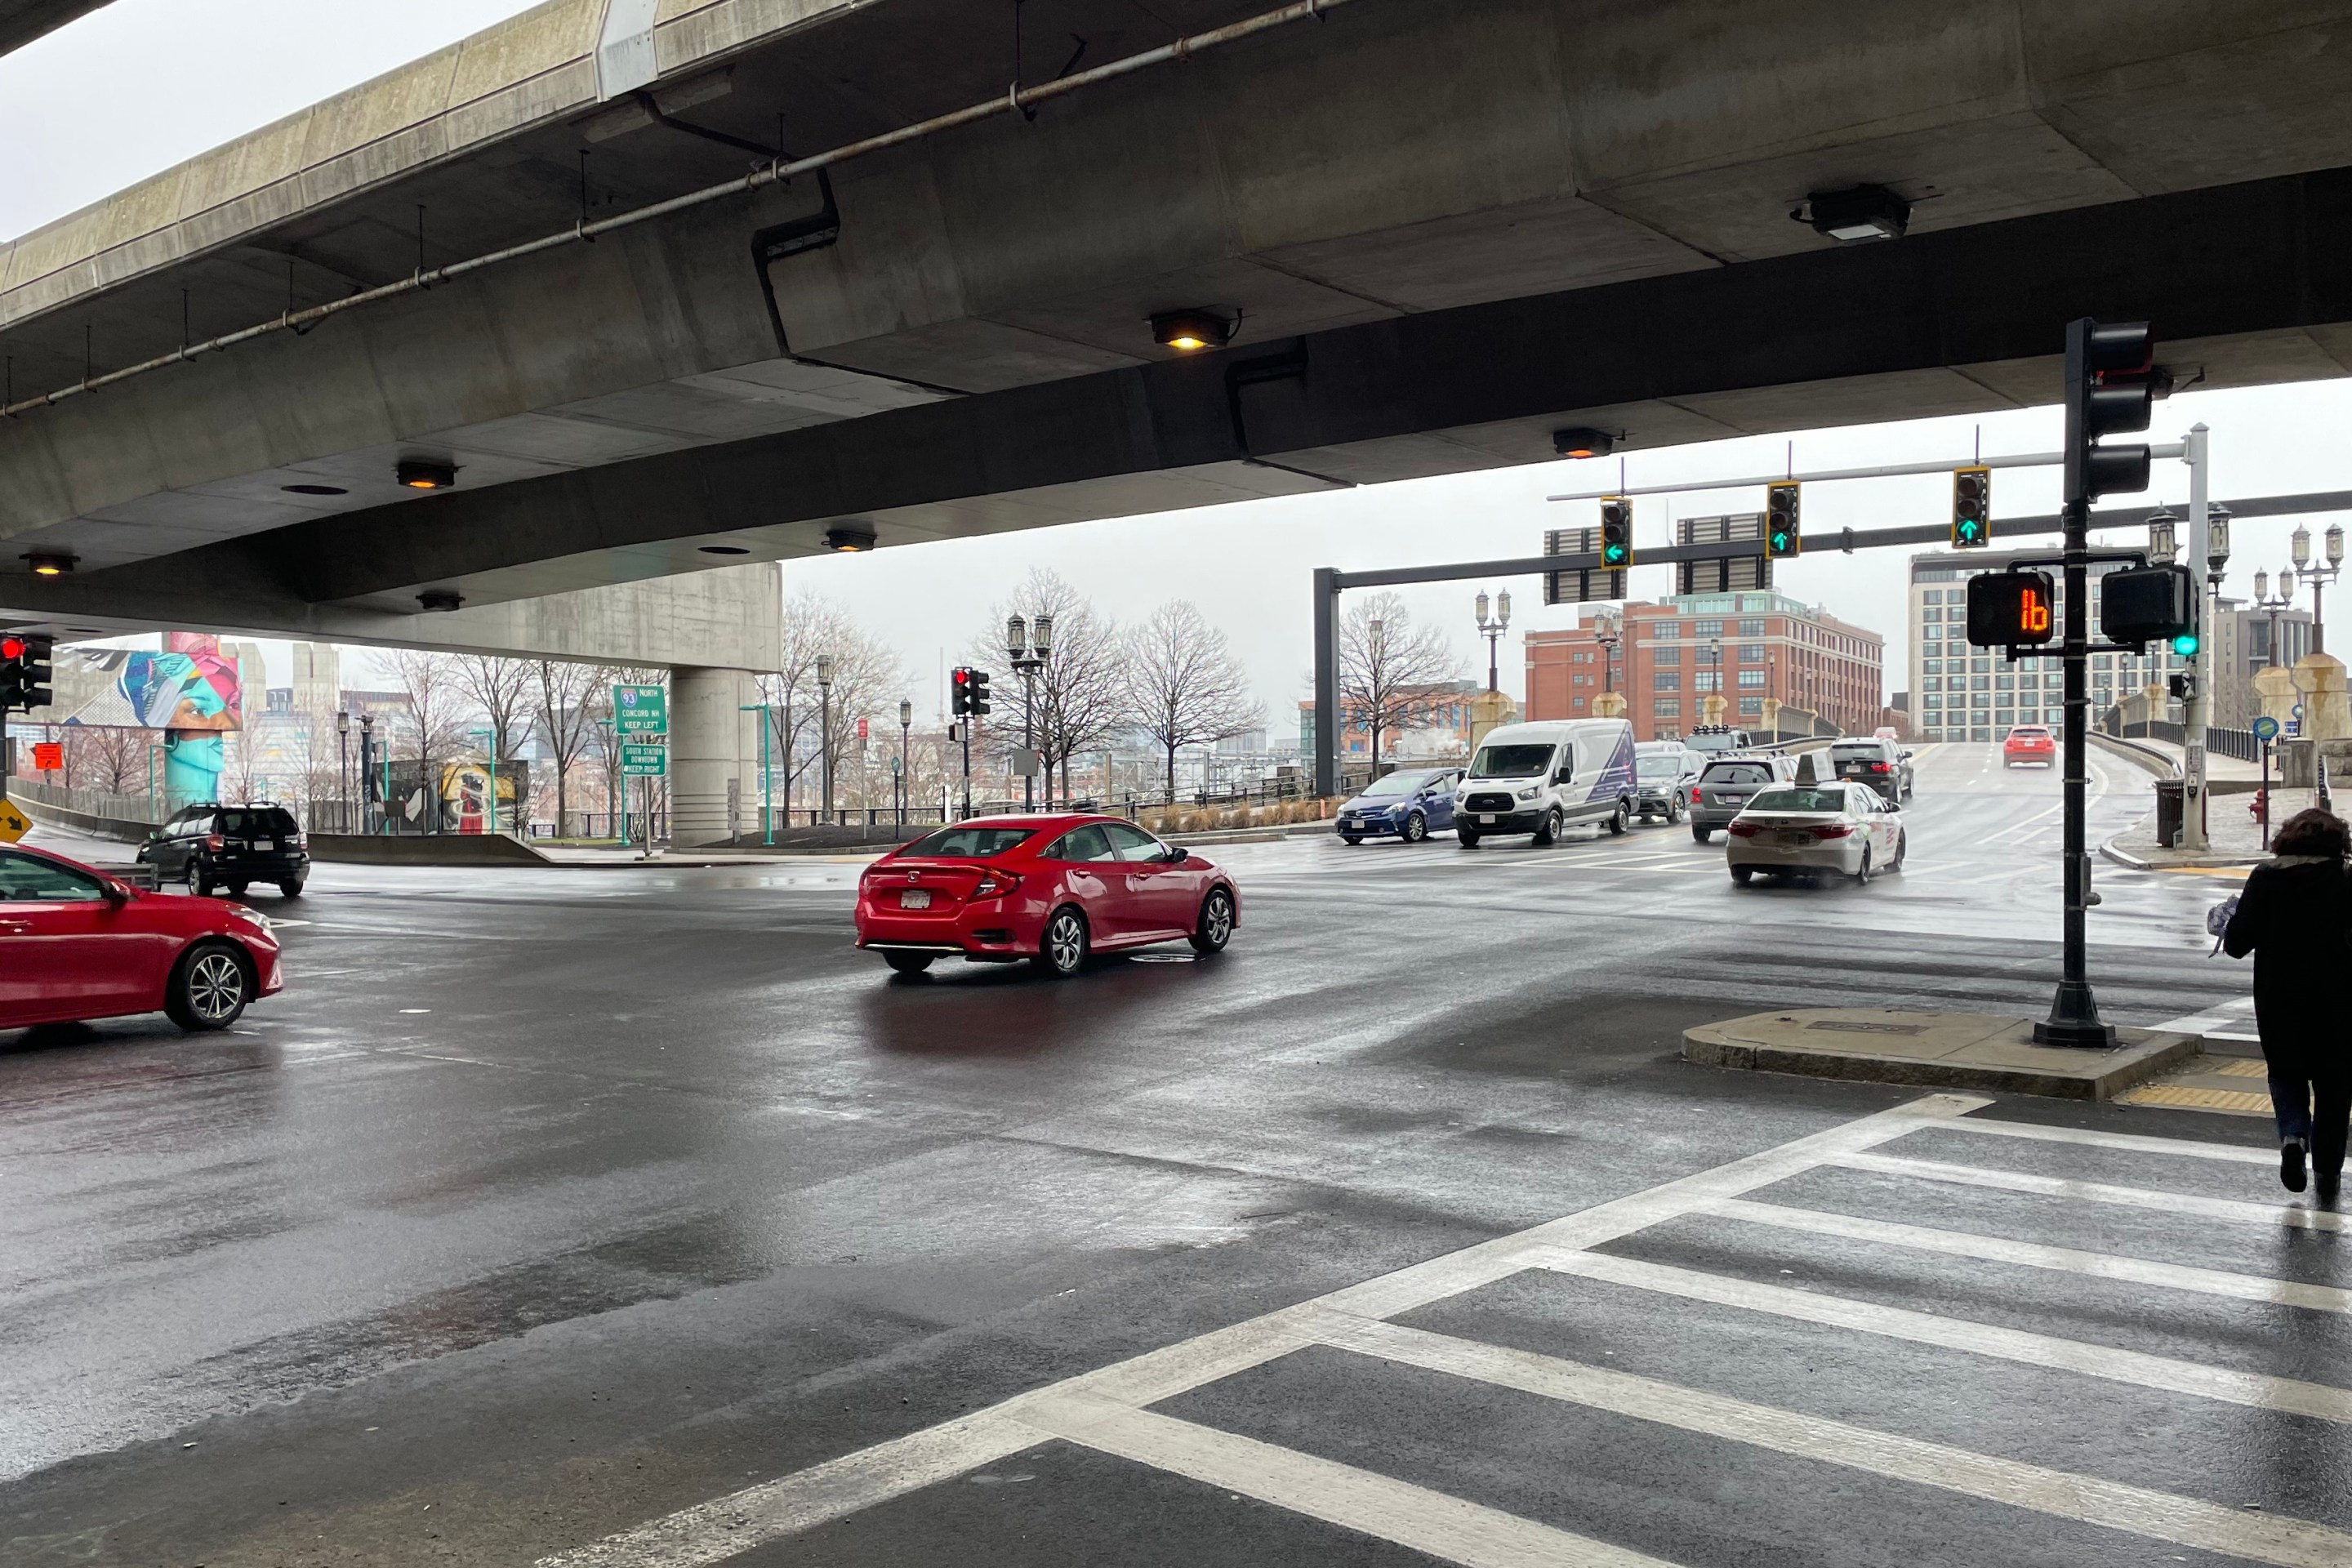 Several cars speed through a wide multi-lane intersection underneath a concrete highway viaduct. On the left edge of the photo are signs for I-90 and I-93. On the right edge, a woman crosses several lanes of traffic in a crosswalk.